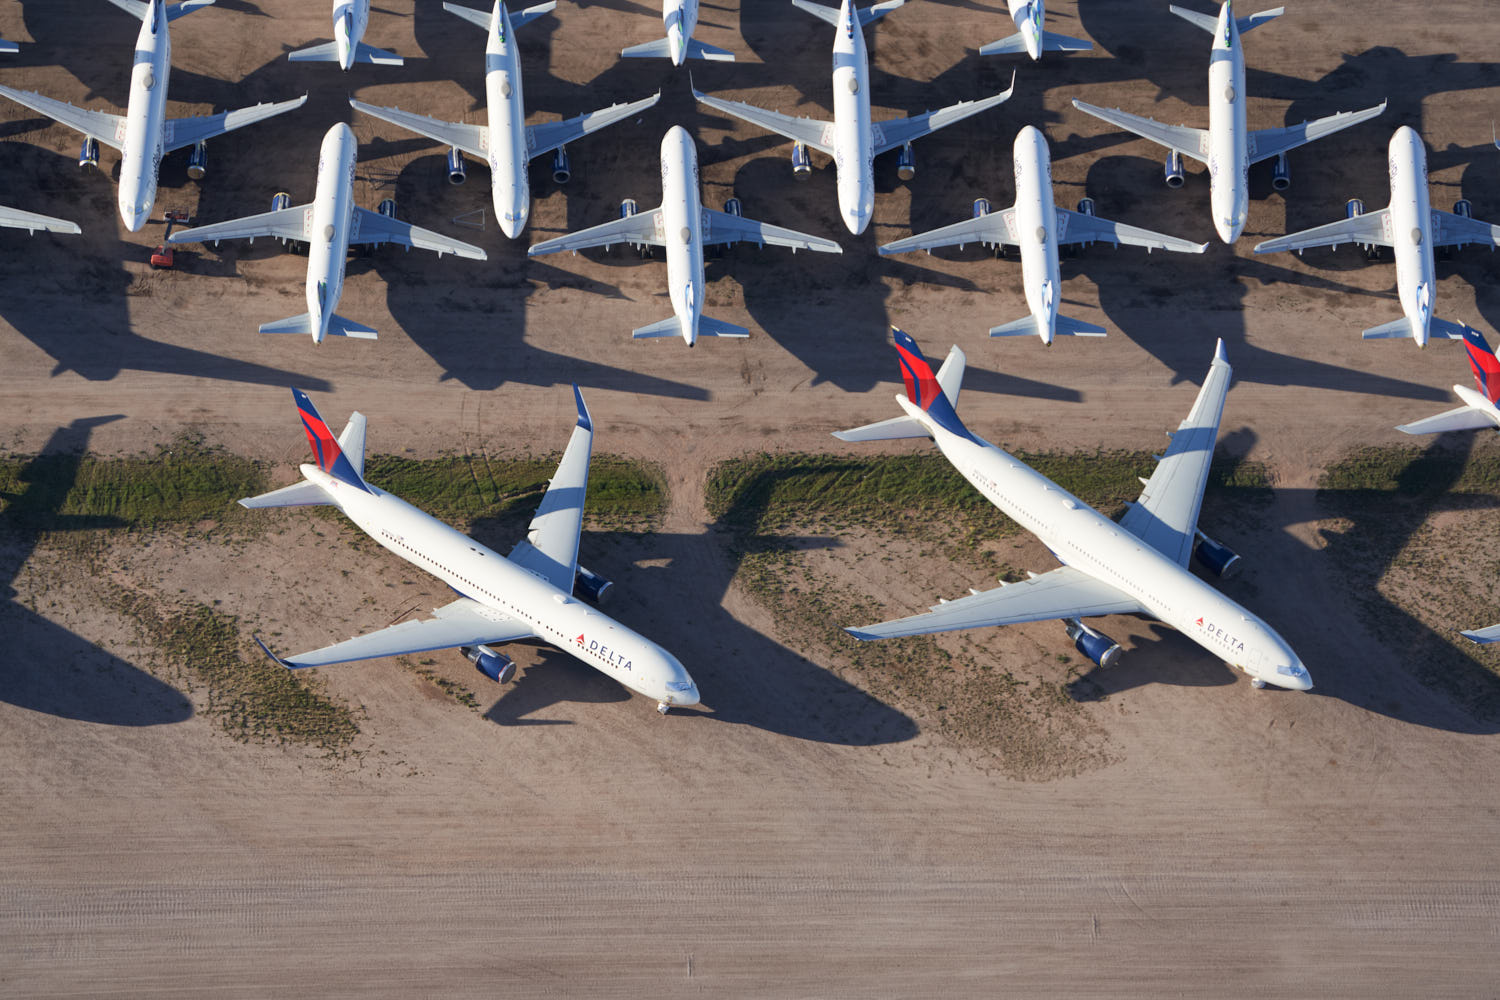 a group of airplanes parked on the ground